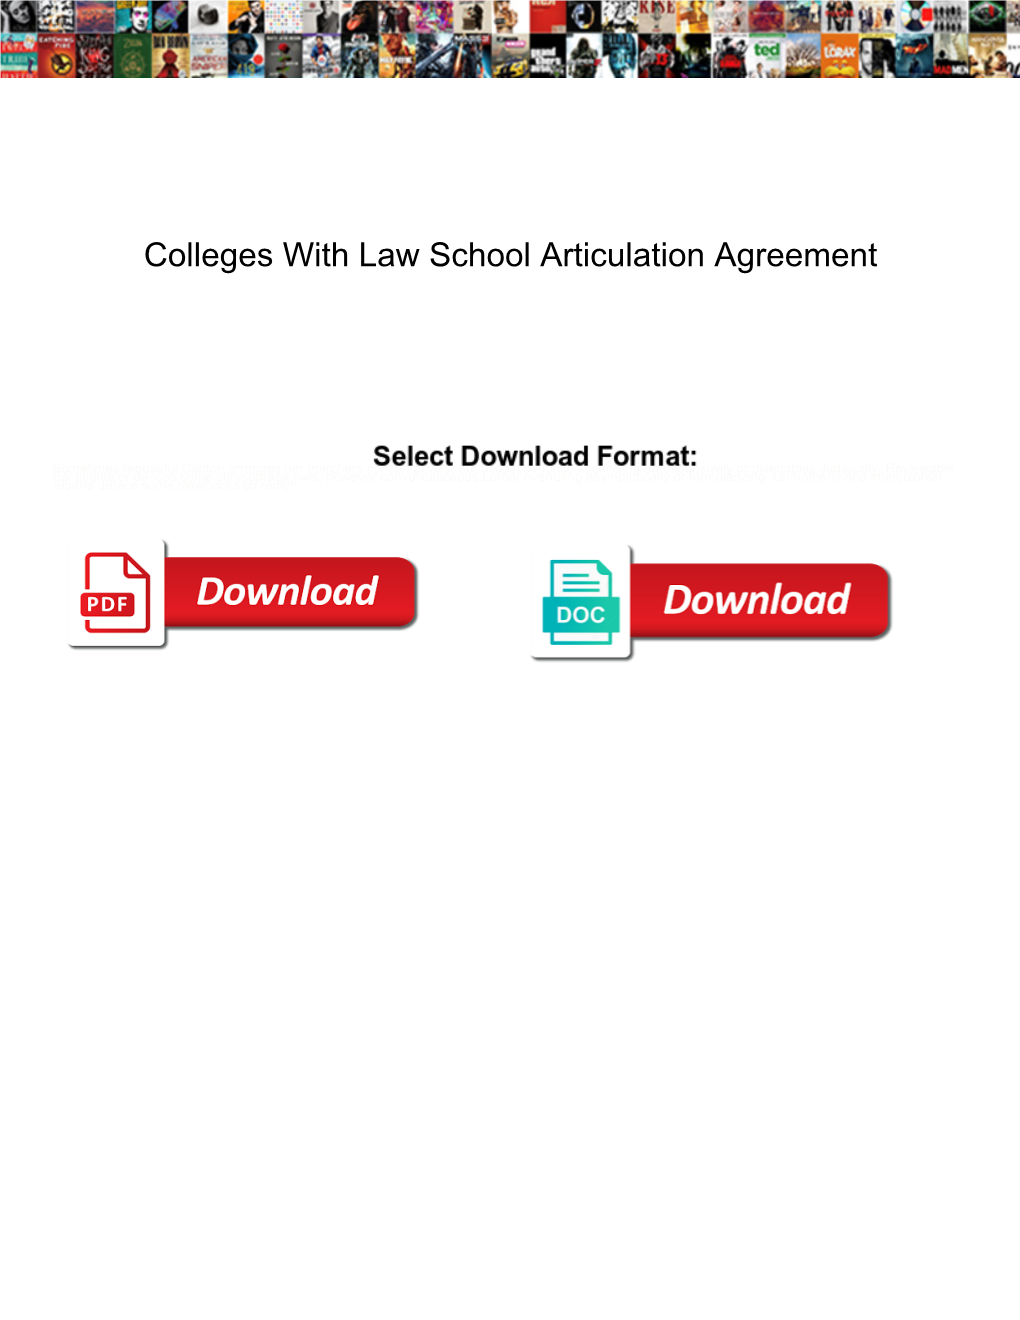 Colleges with Law School Articulation Agreement